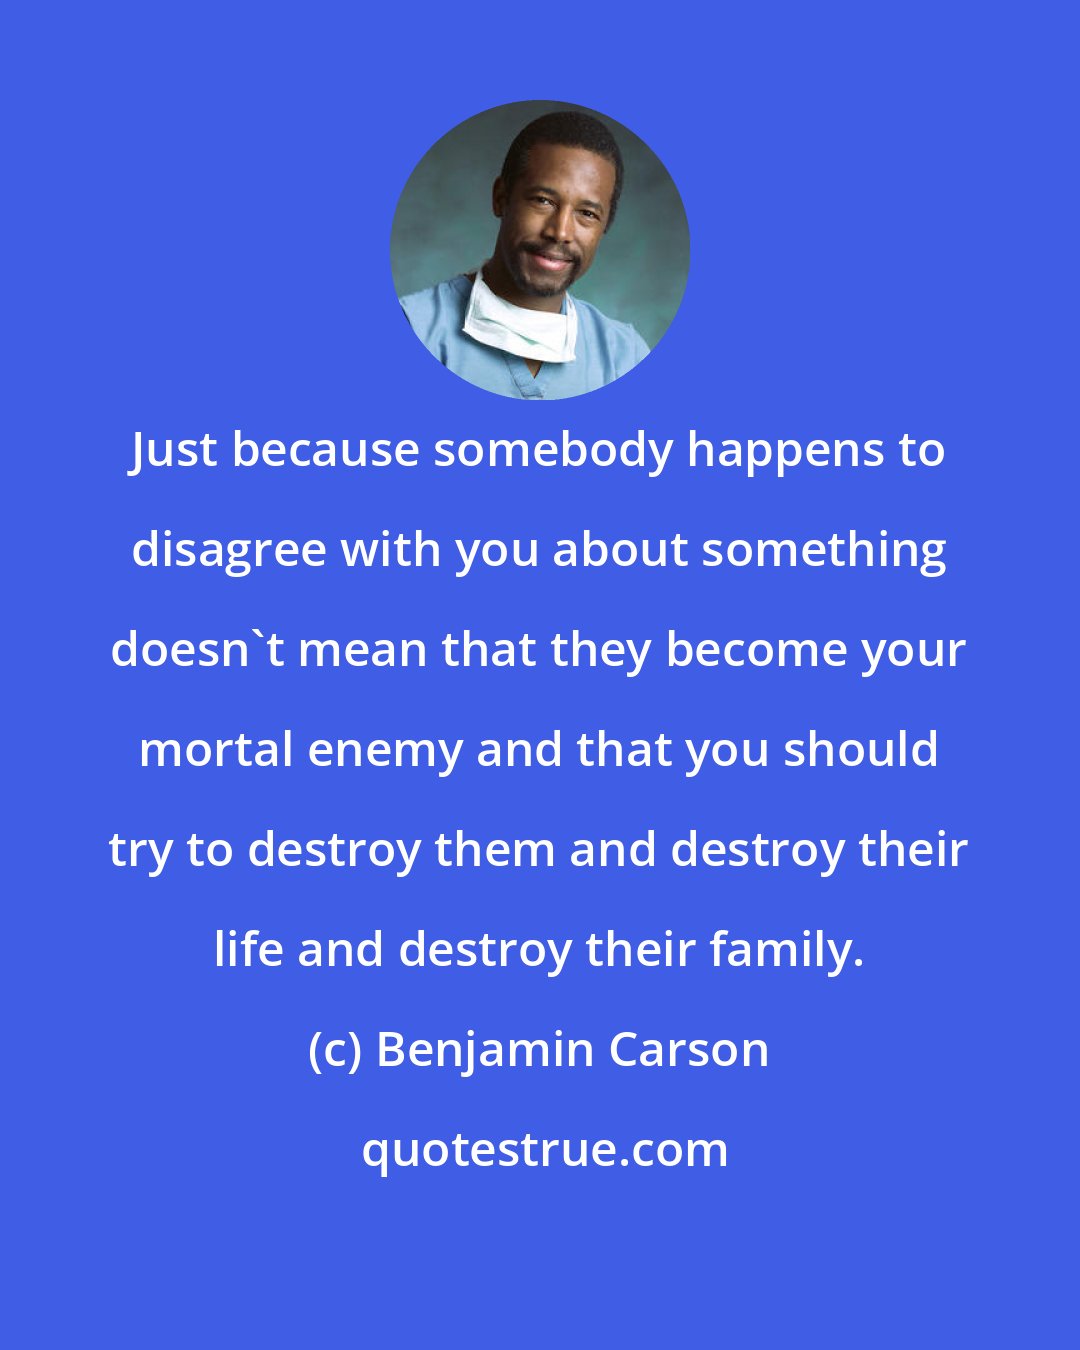 Benjamin Carson: Just because somebody happens to disagree with you about something doesn't mean that they become your mortal enemy and that you should try to destroy them and destroy their life and destroy their family.